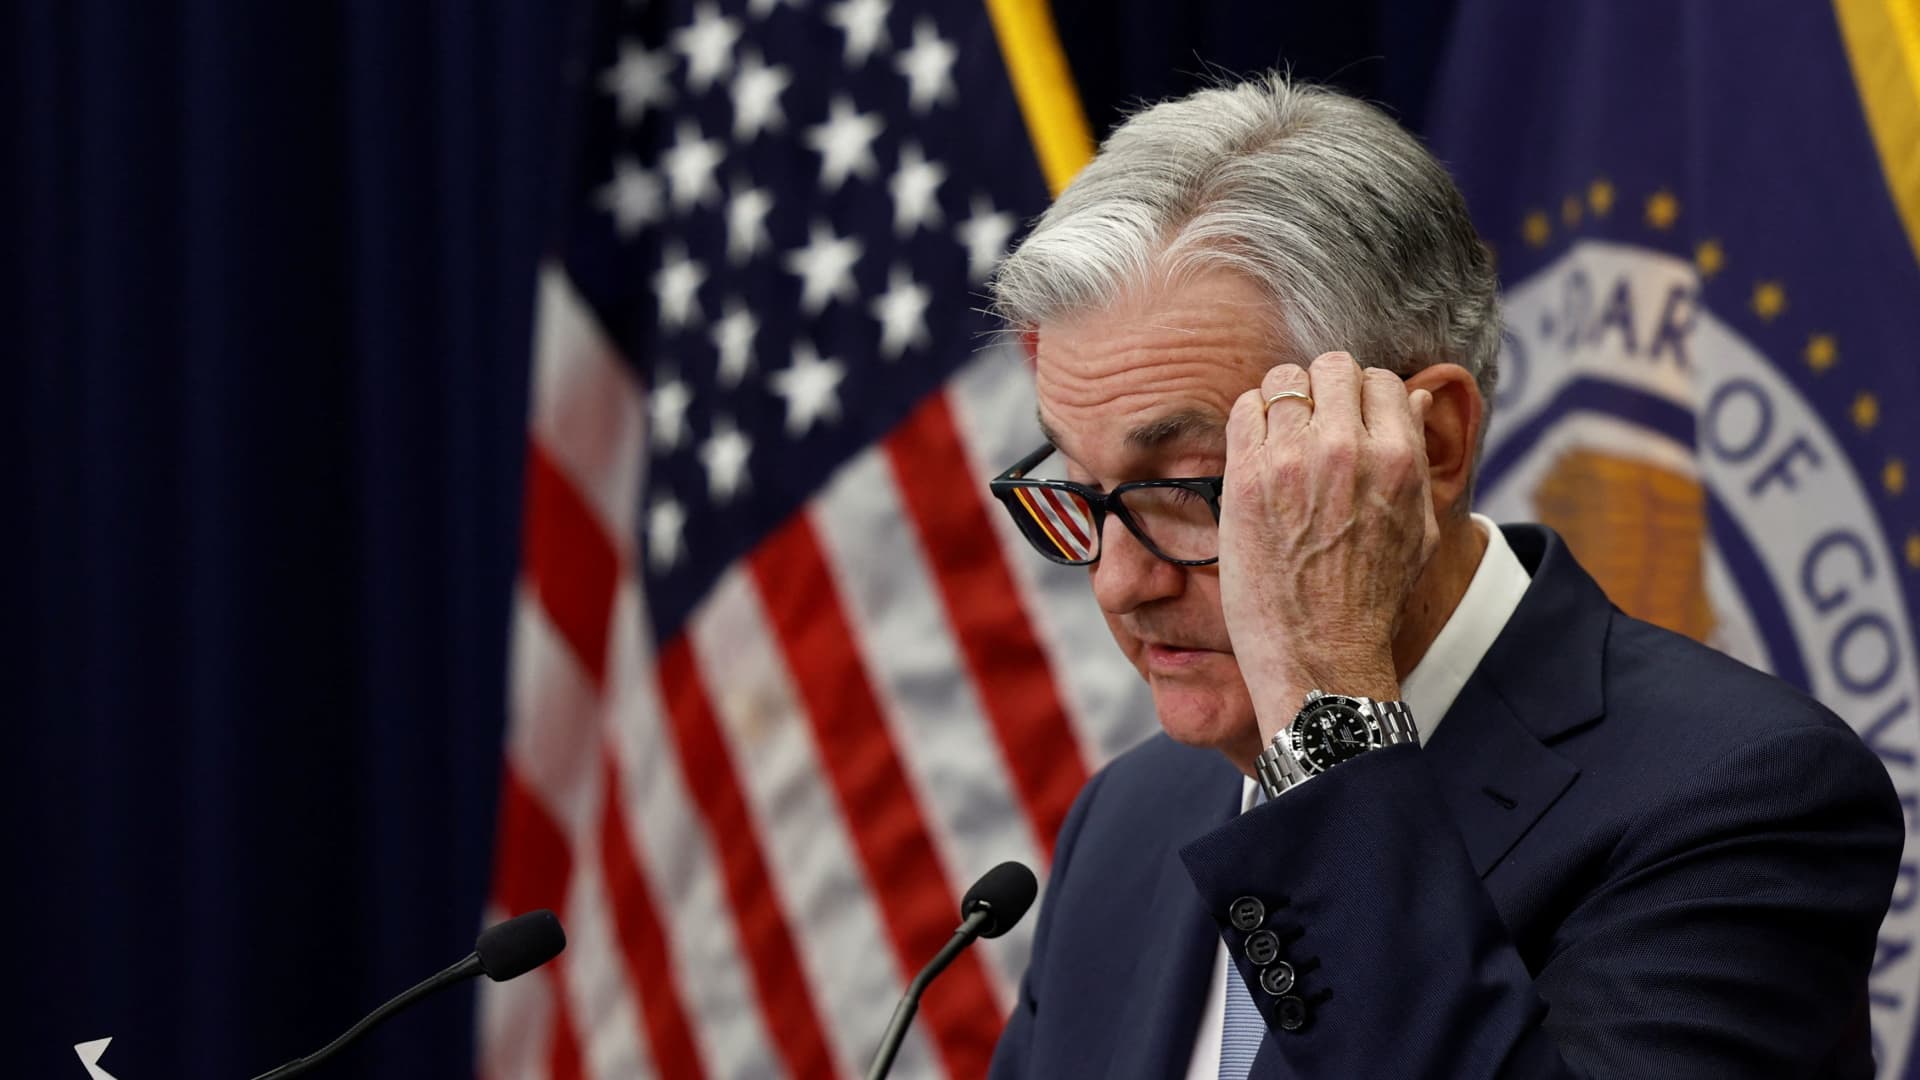 Here's how the Federal Reserve confused the markets